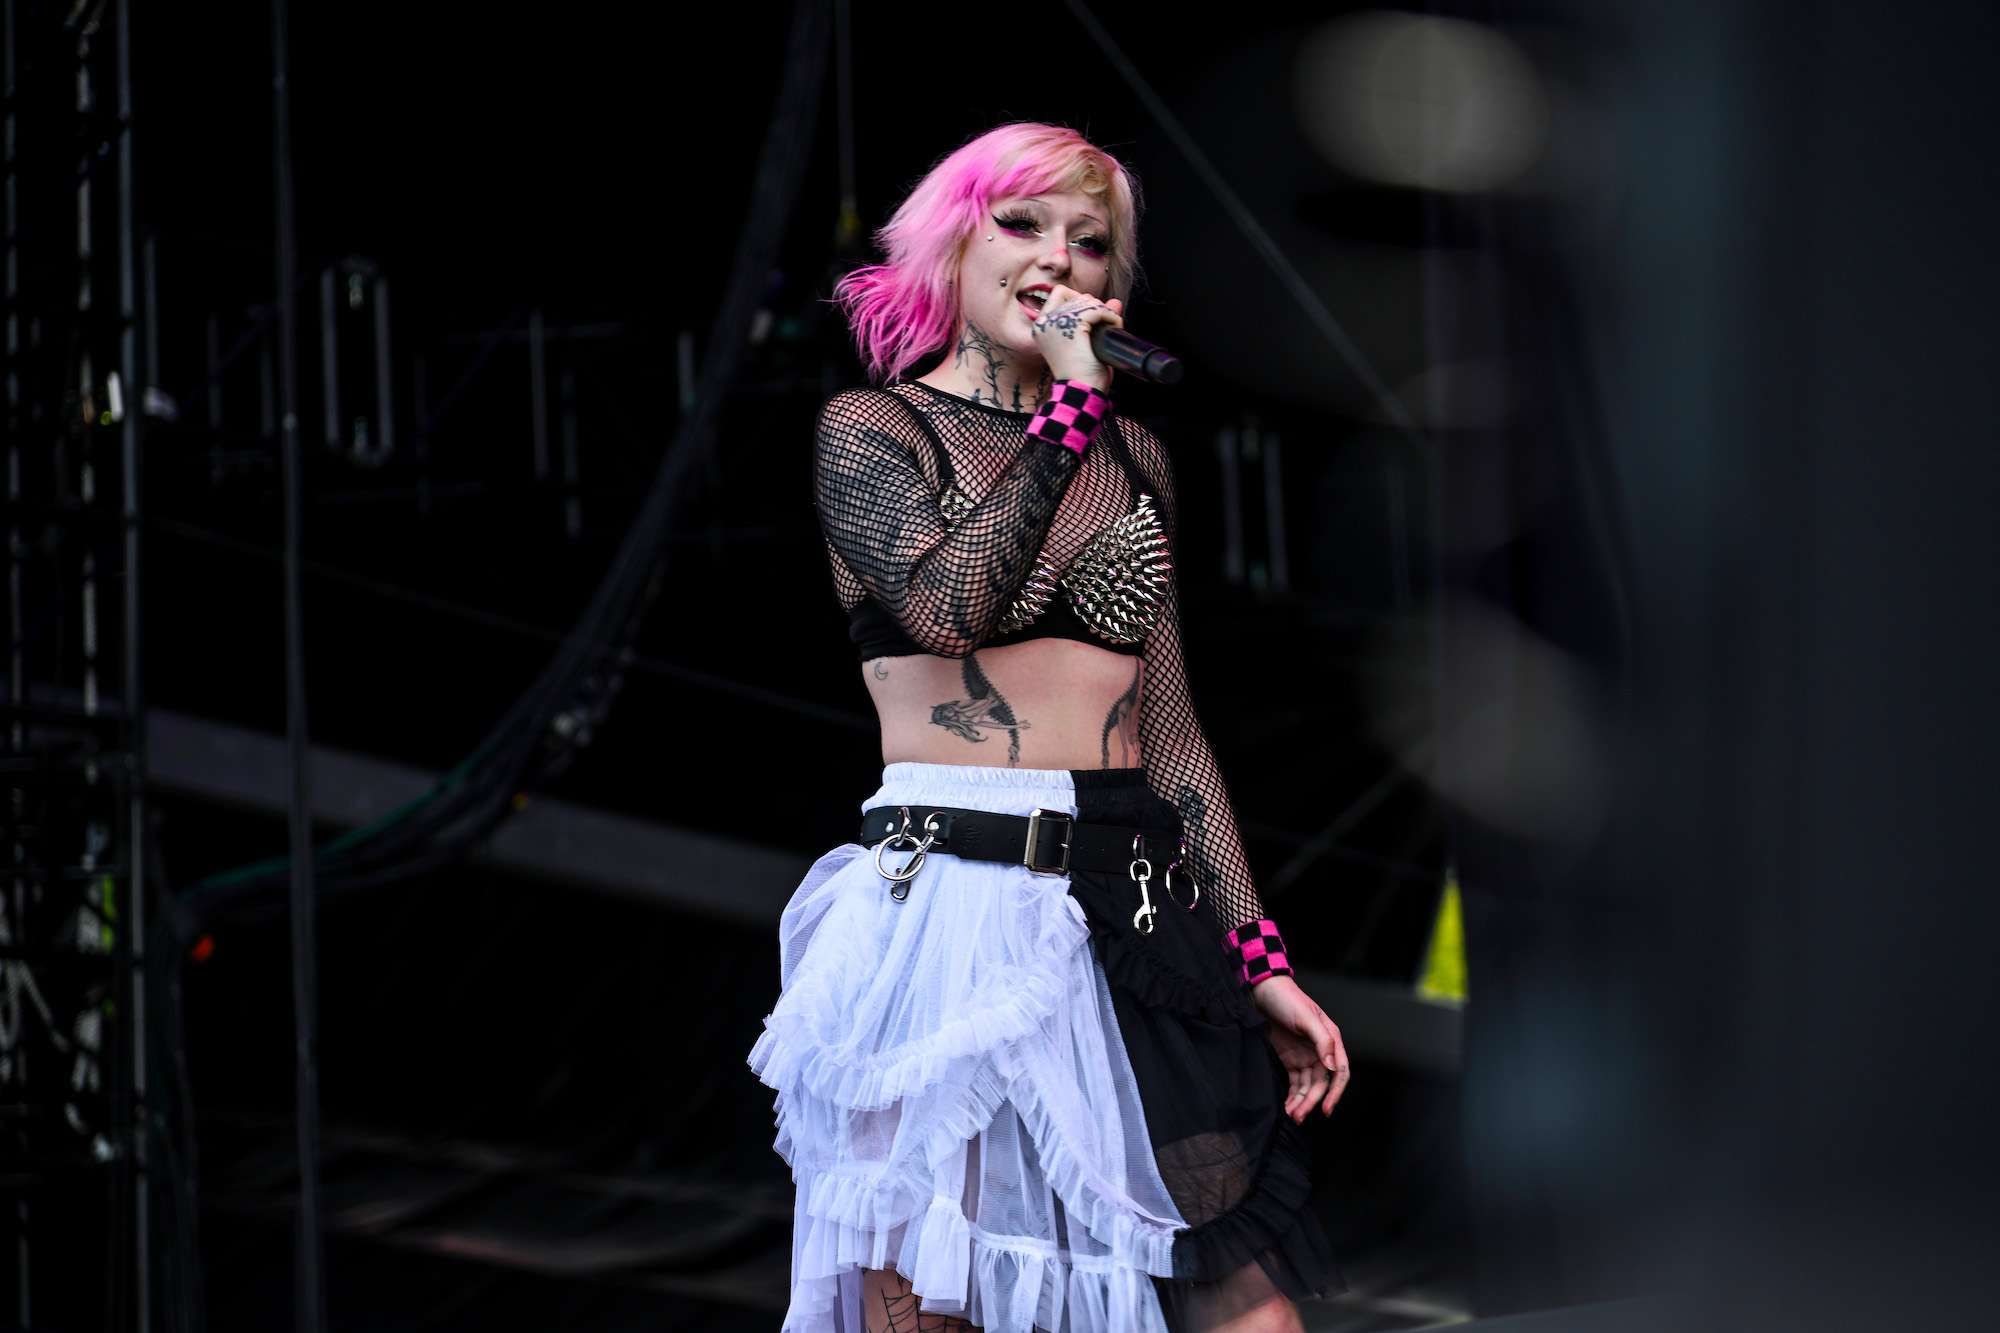 Carolesdaughter Live at Riot Fest [GALLERY] 7